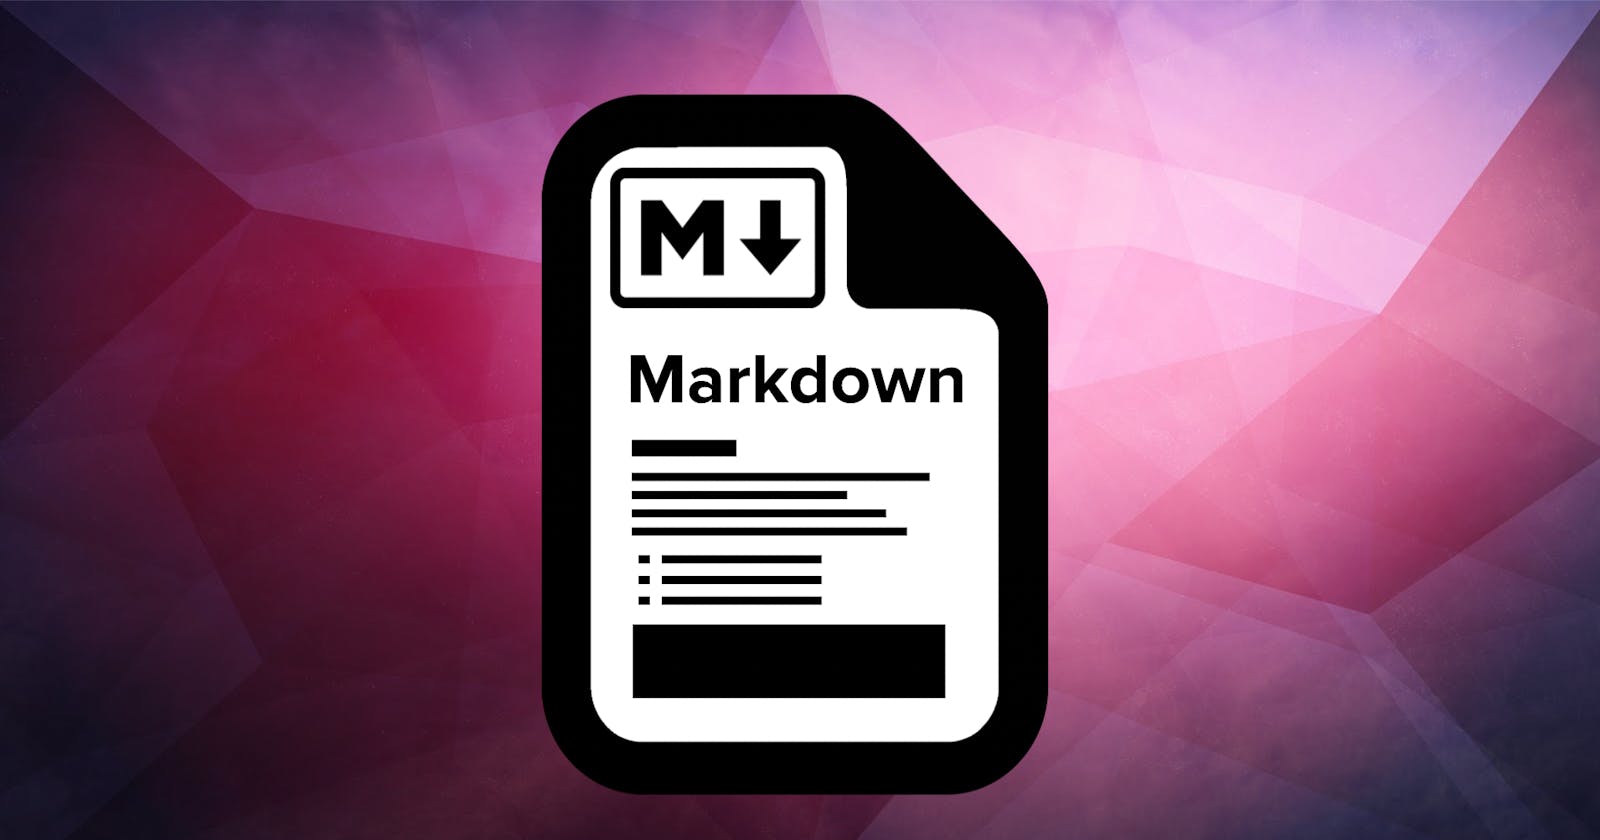 Welcome to Markdown